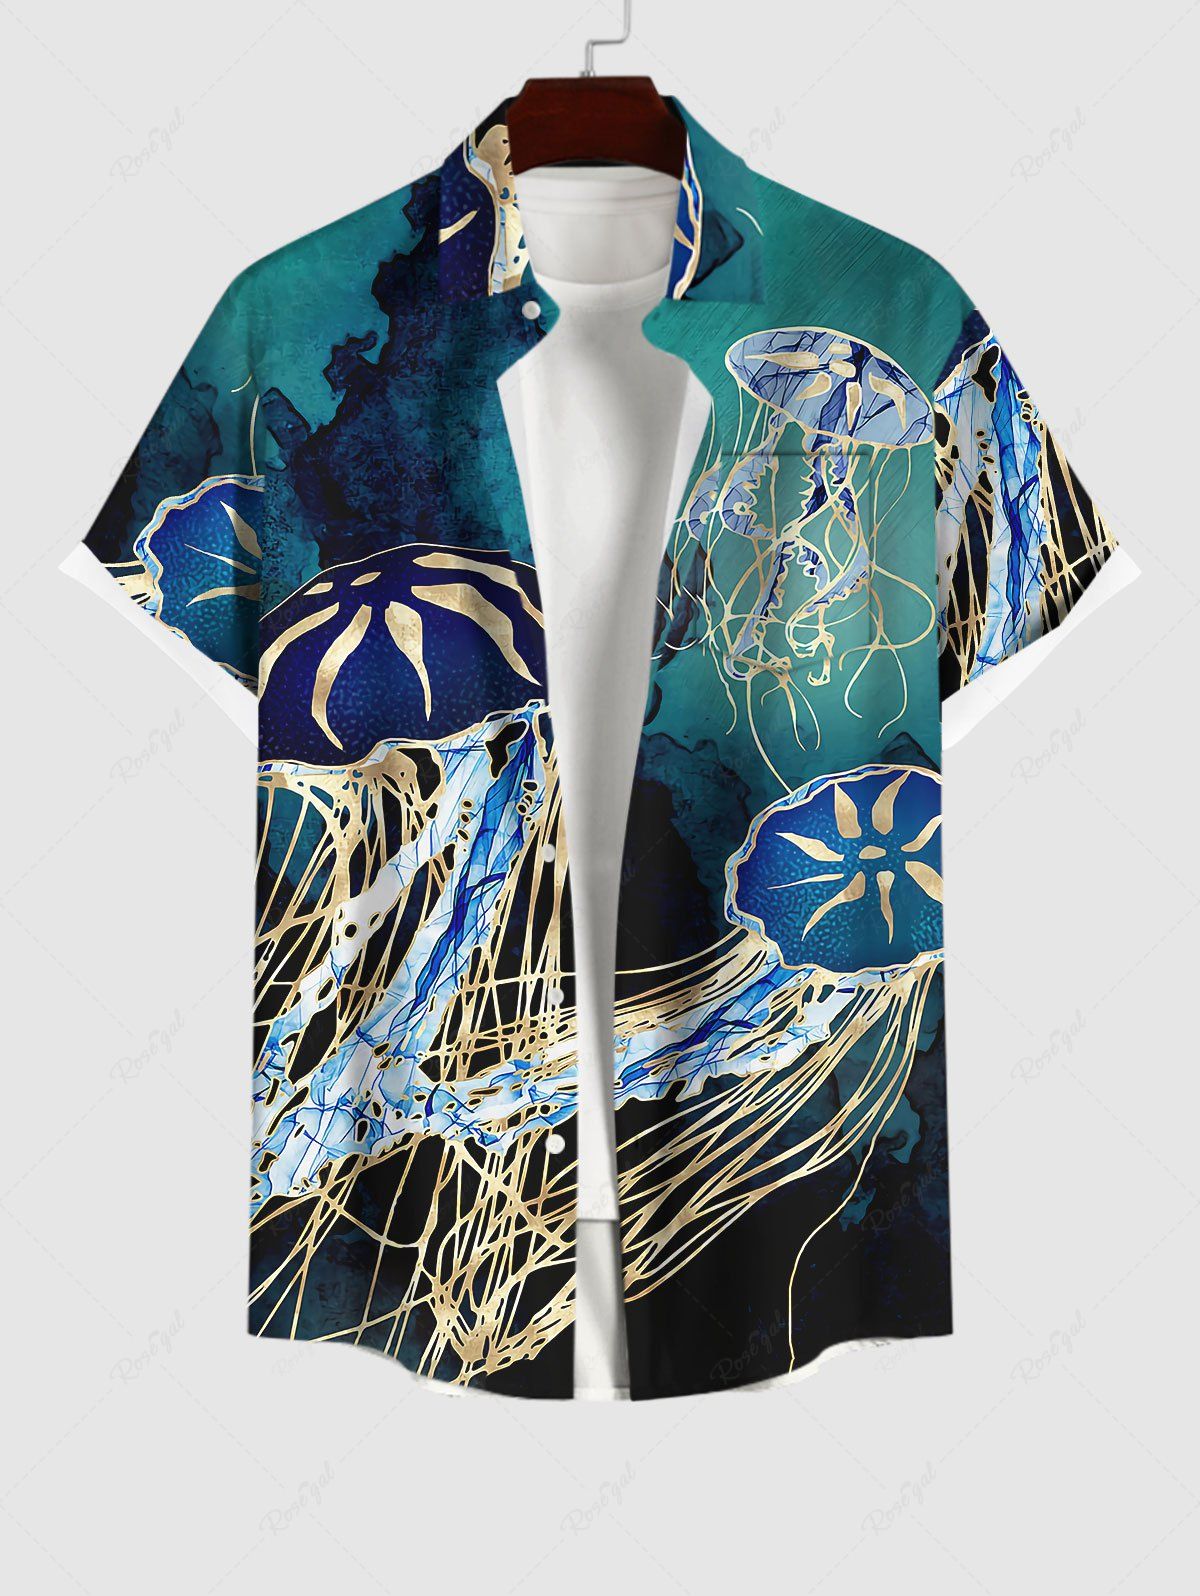 Hawaii Plus Size Sea Creatures Underwater World Jellyfish Print Buttons Pocket Shirt For Men Multi-A L